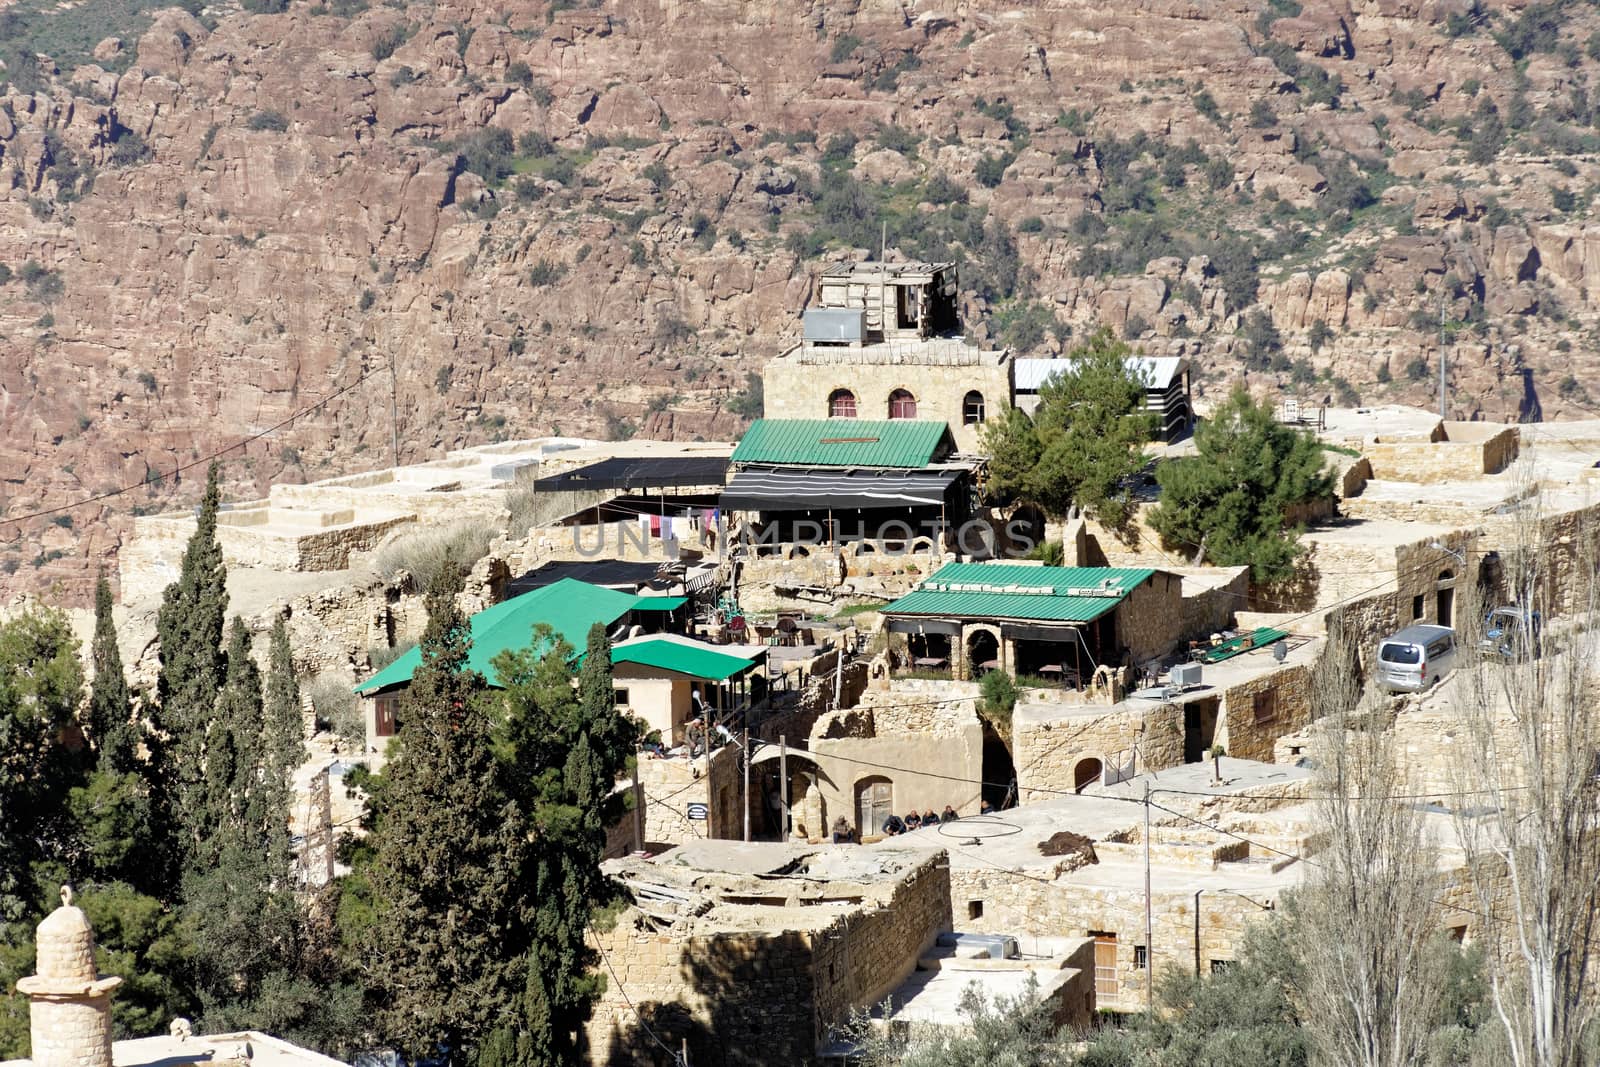 Ecology Lodge on the edge of the valley of the great Dana Biosphere Reserve, Jordan by geogif